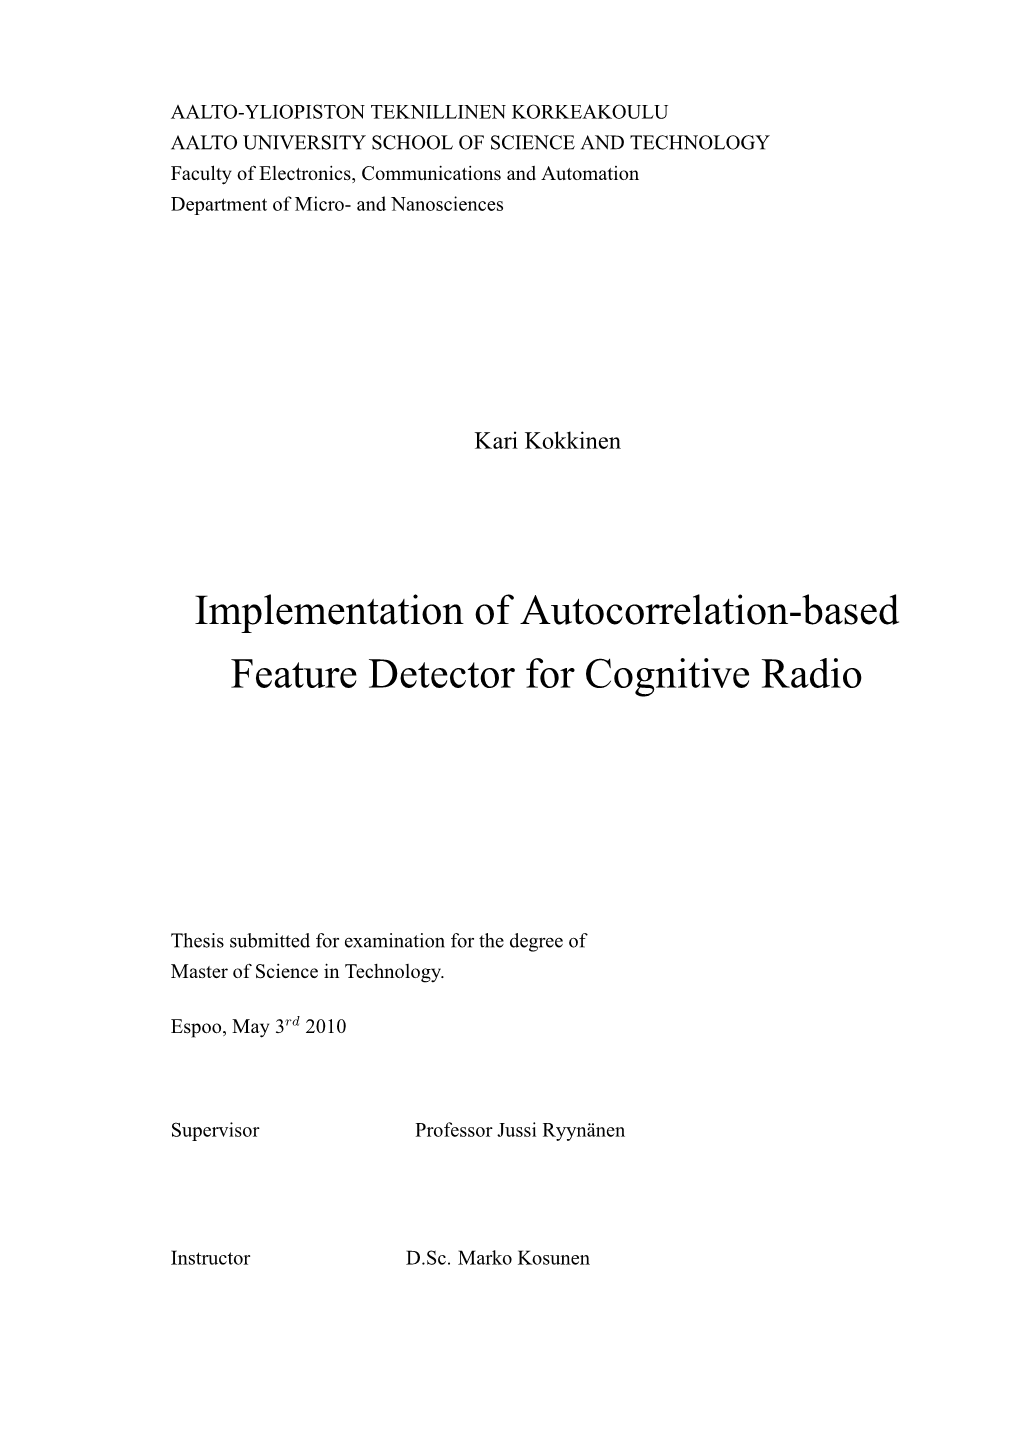 Implementation of Autocorrelation-Based Feature Detector for Cognitive Radio